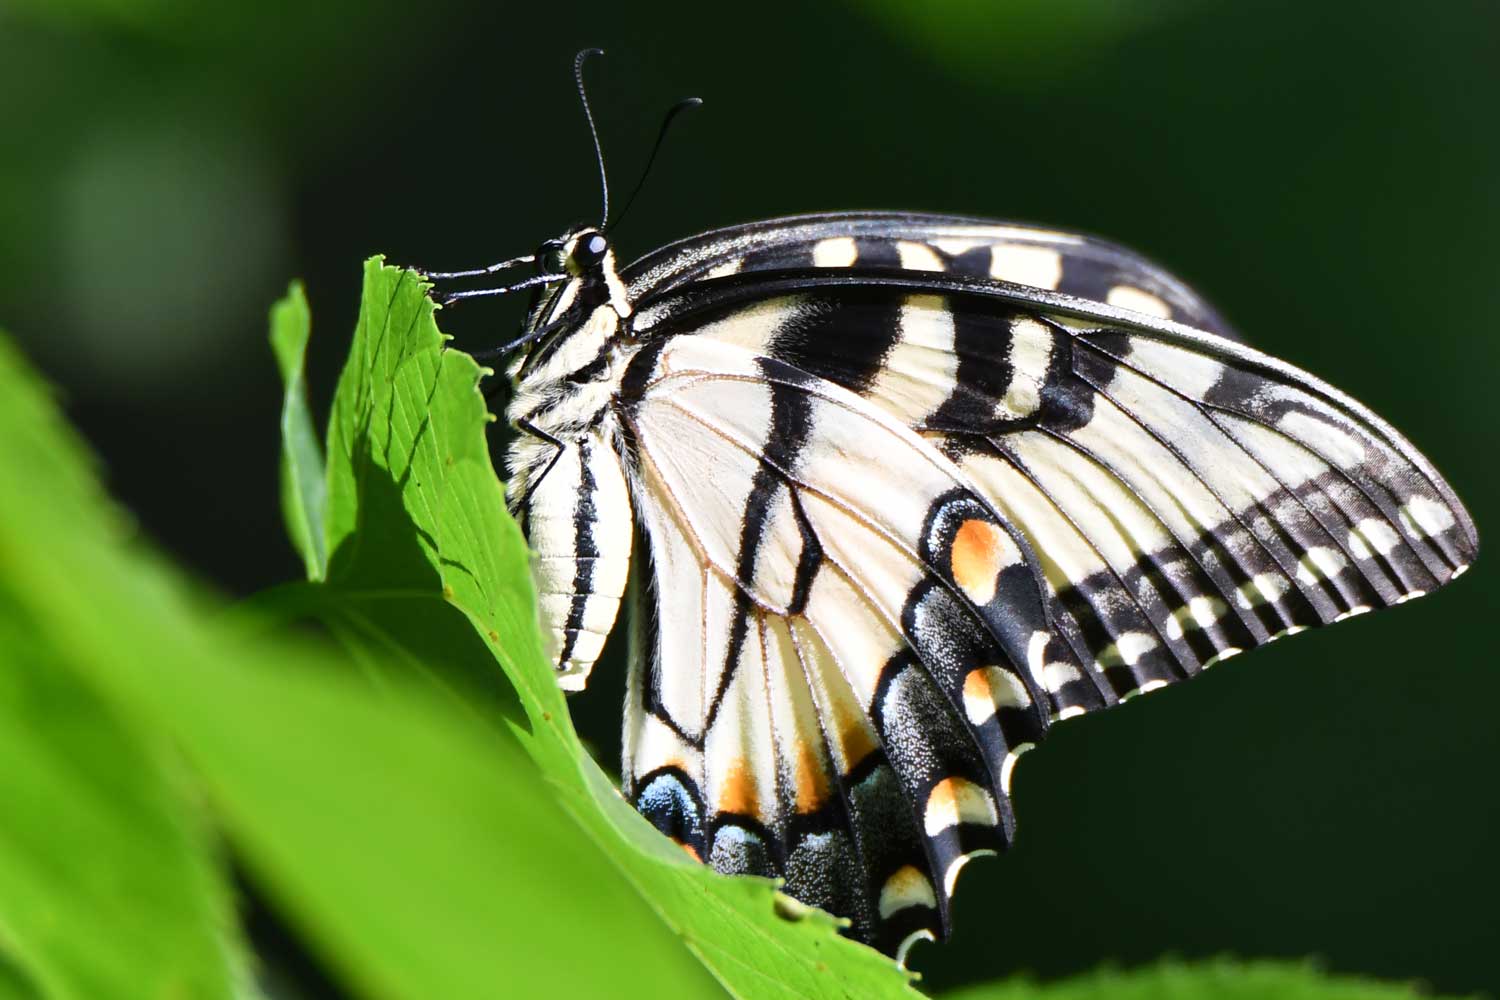 Eastern tiger swallowtail butterfly on a leaf.